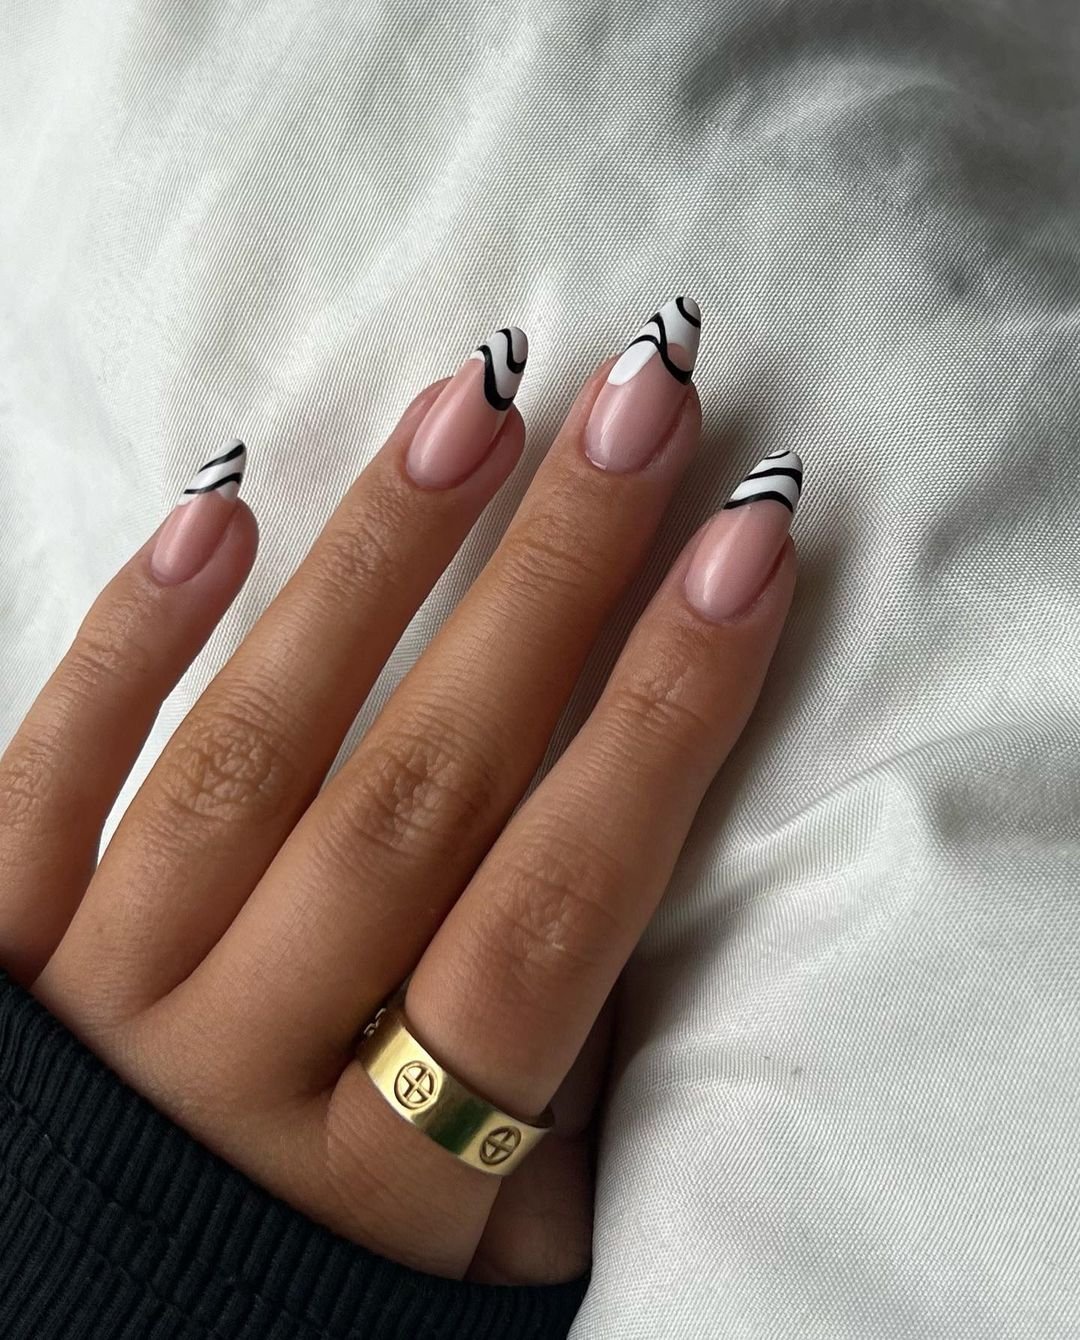 27 - Picture of Black and White Nails